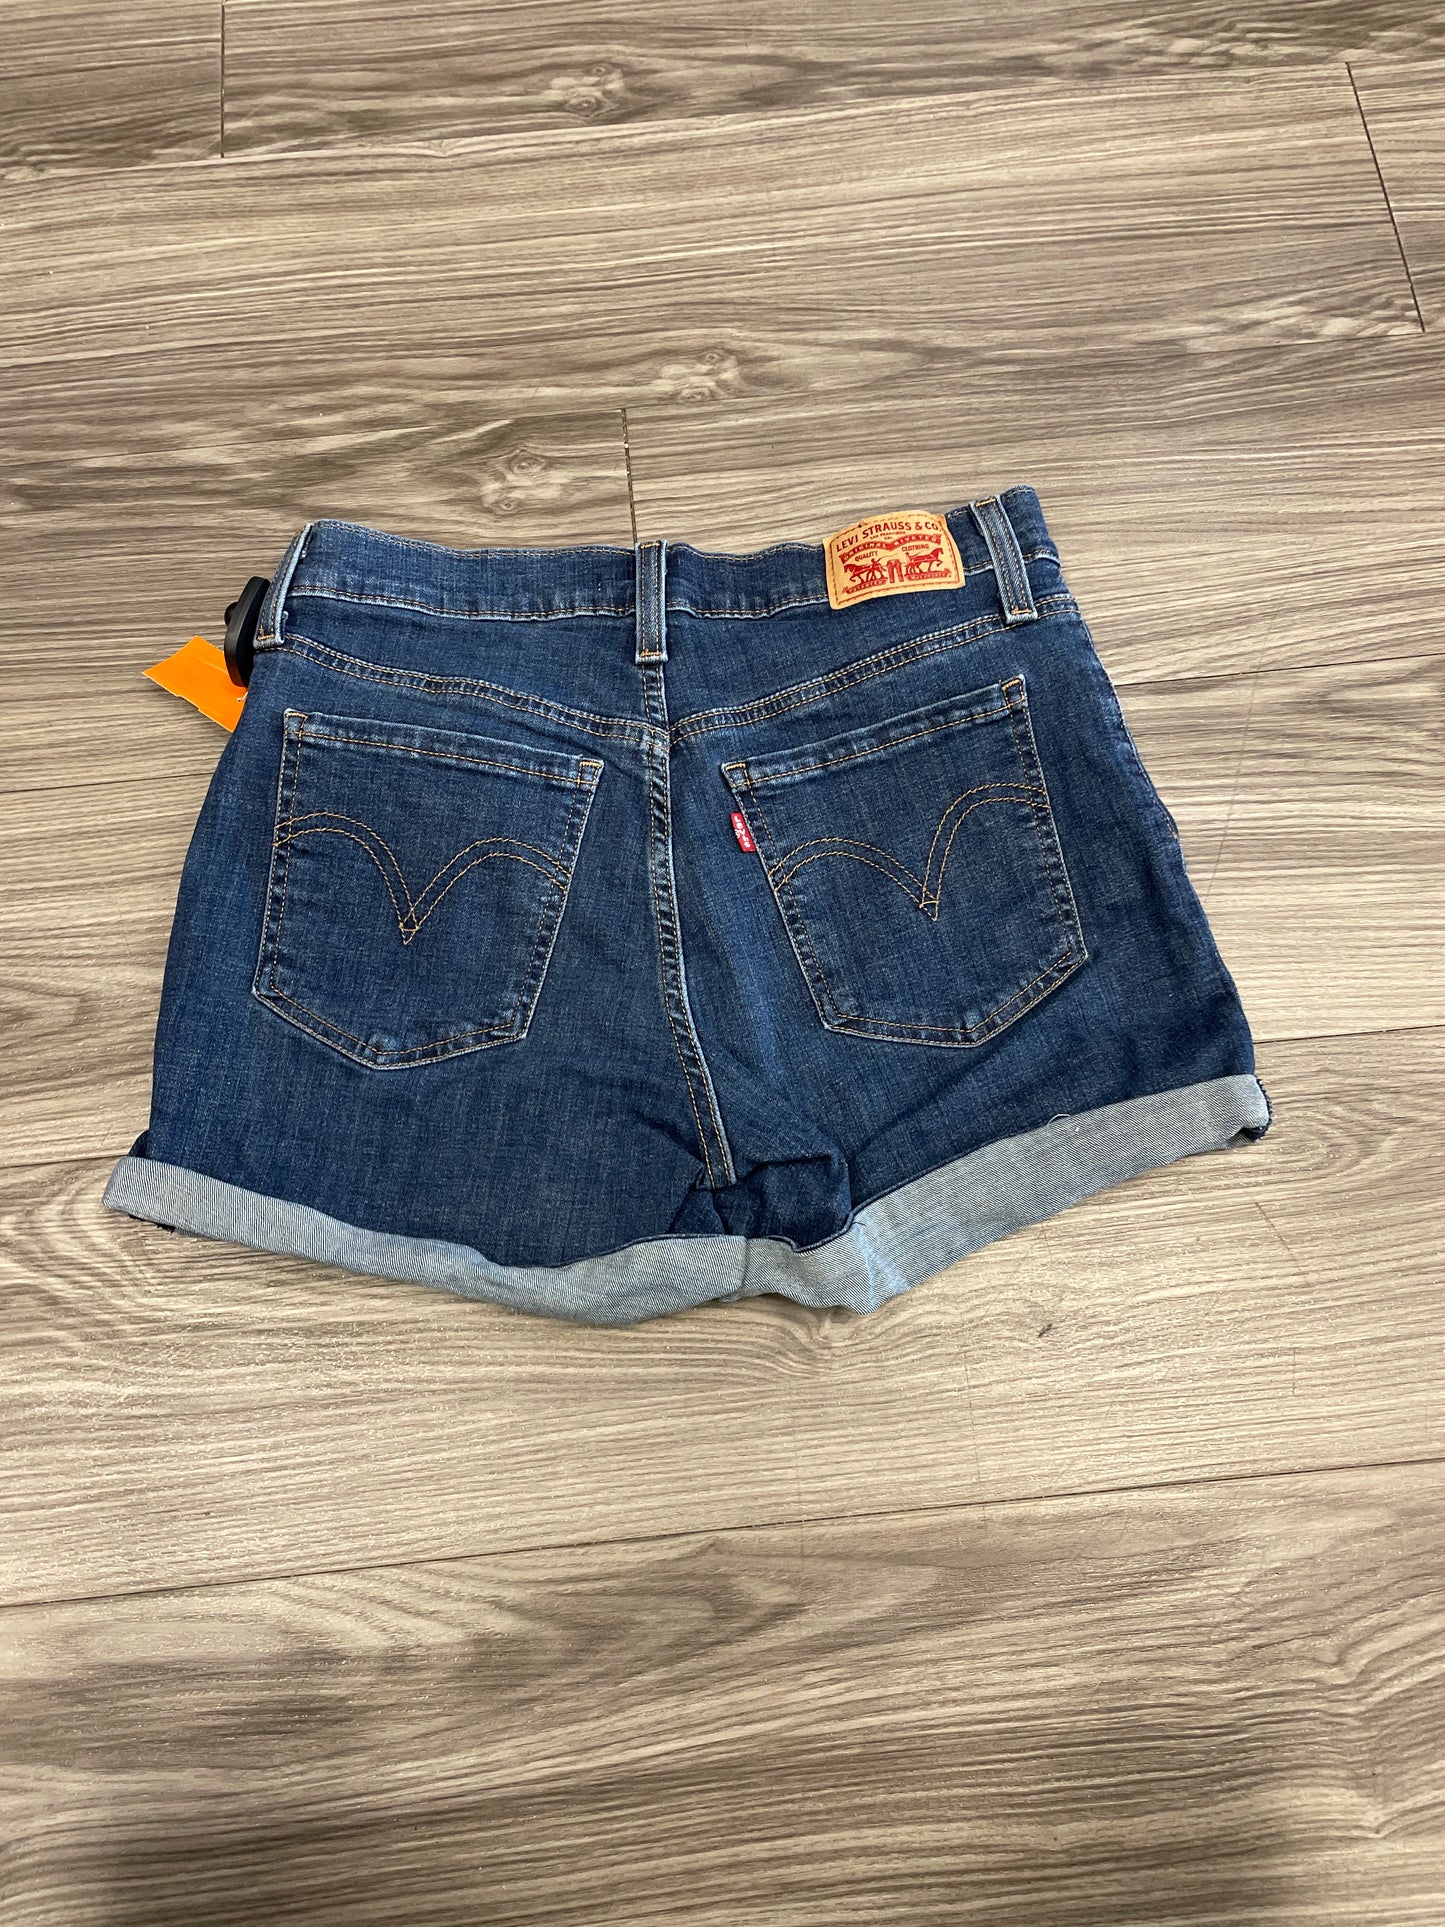 Shorts By Levis  Size: 6